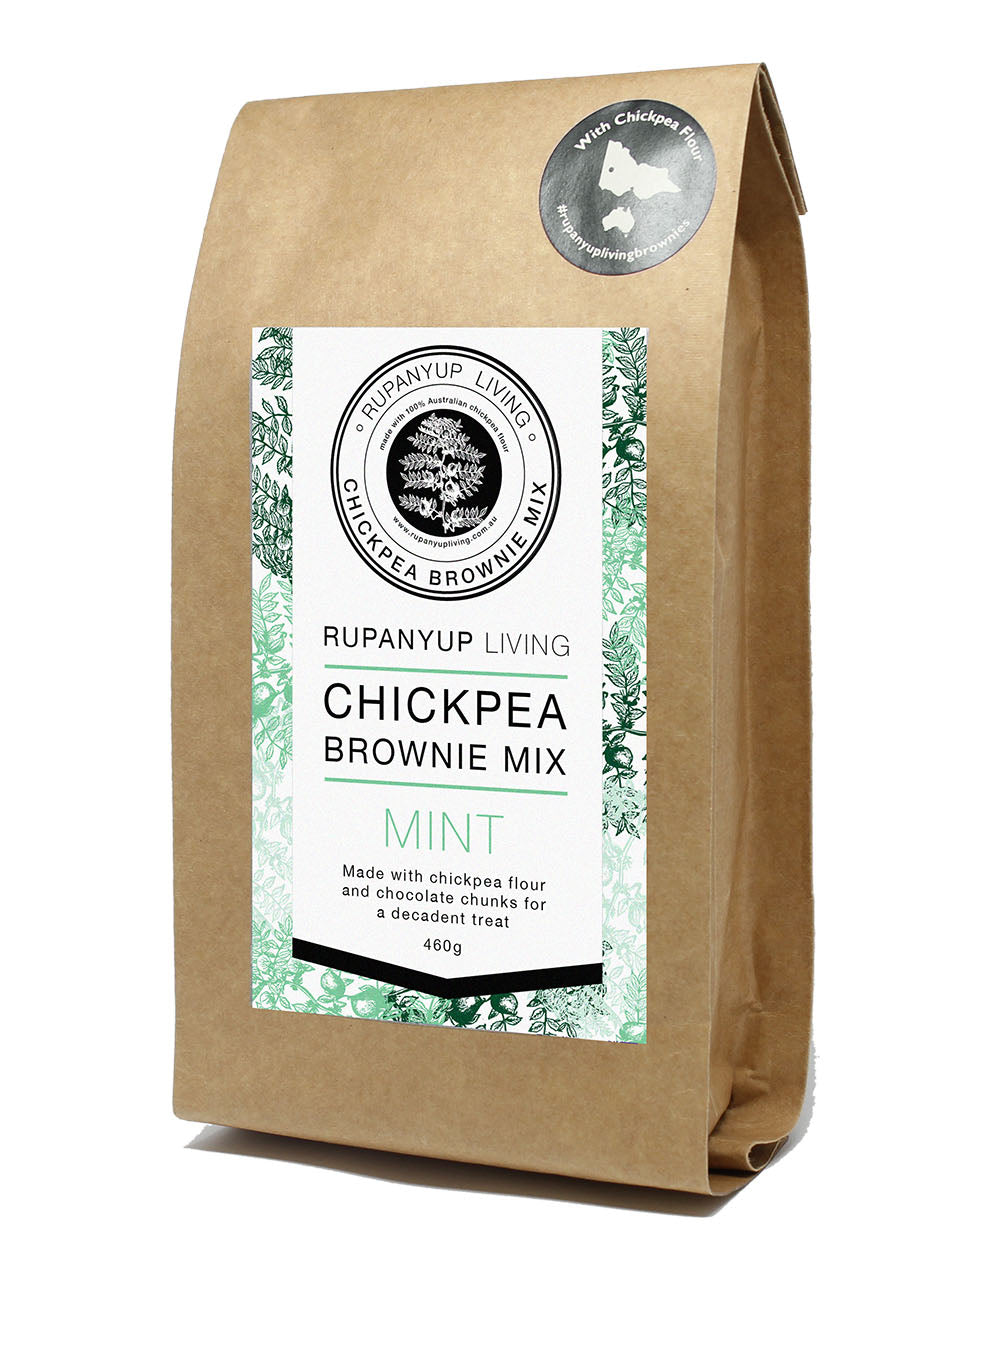 Chickpea Brownie Mix - Mint